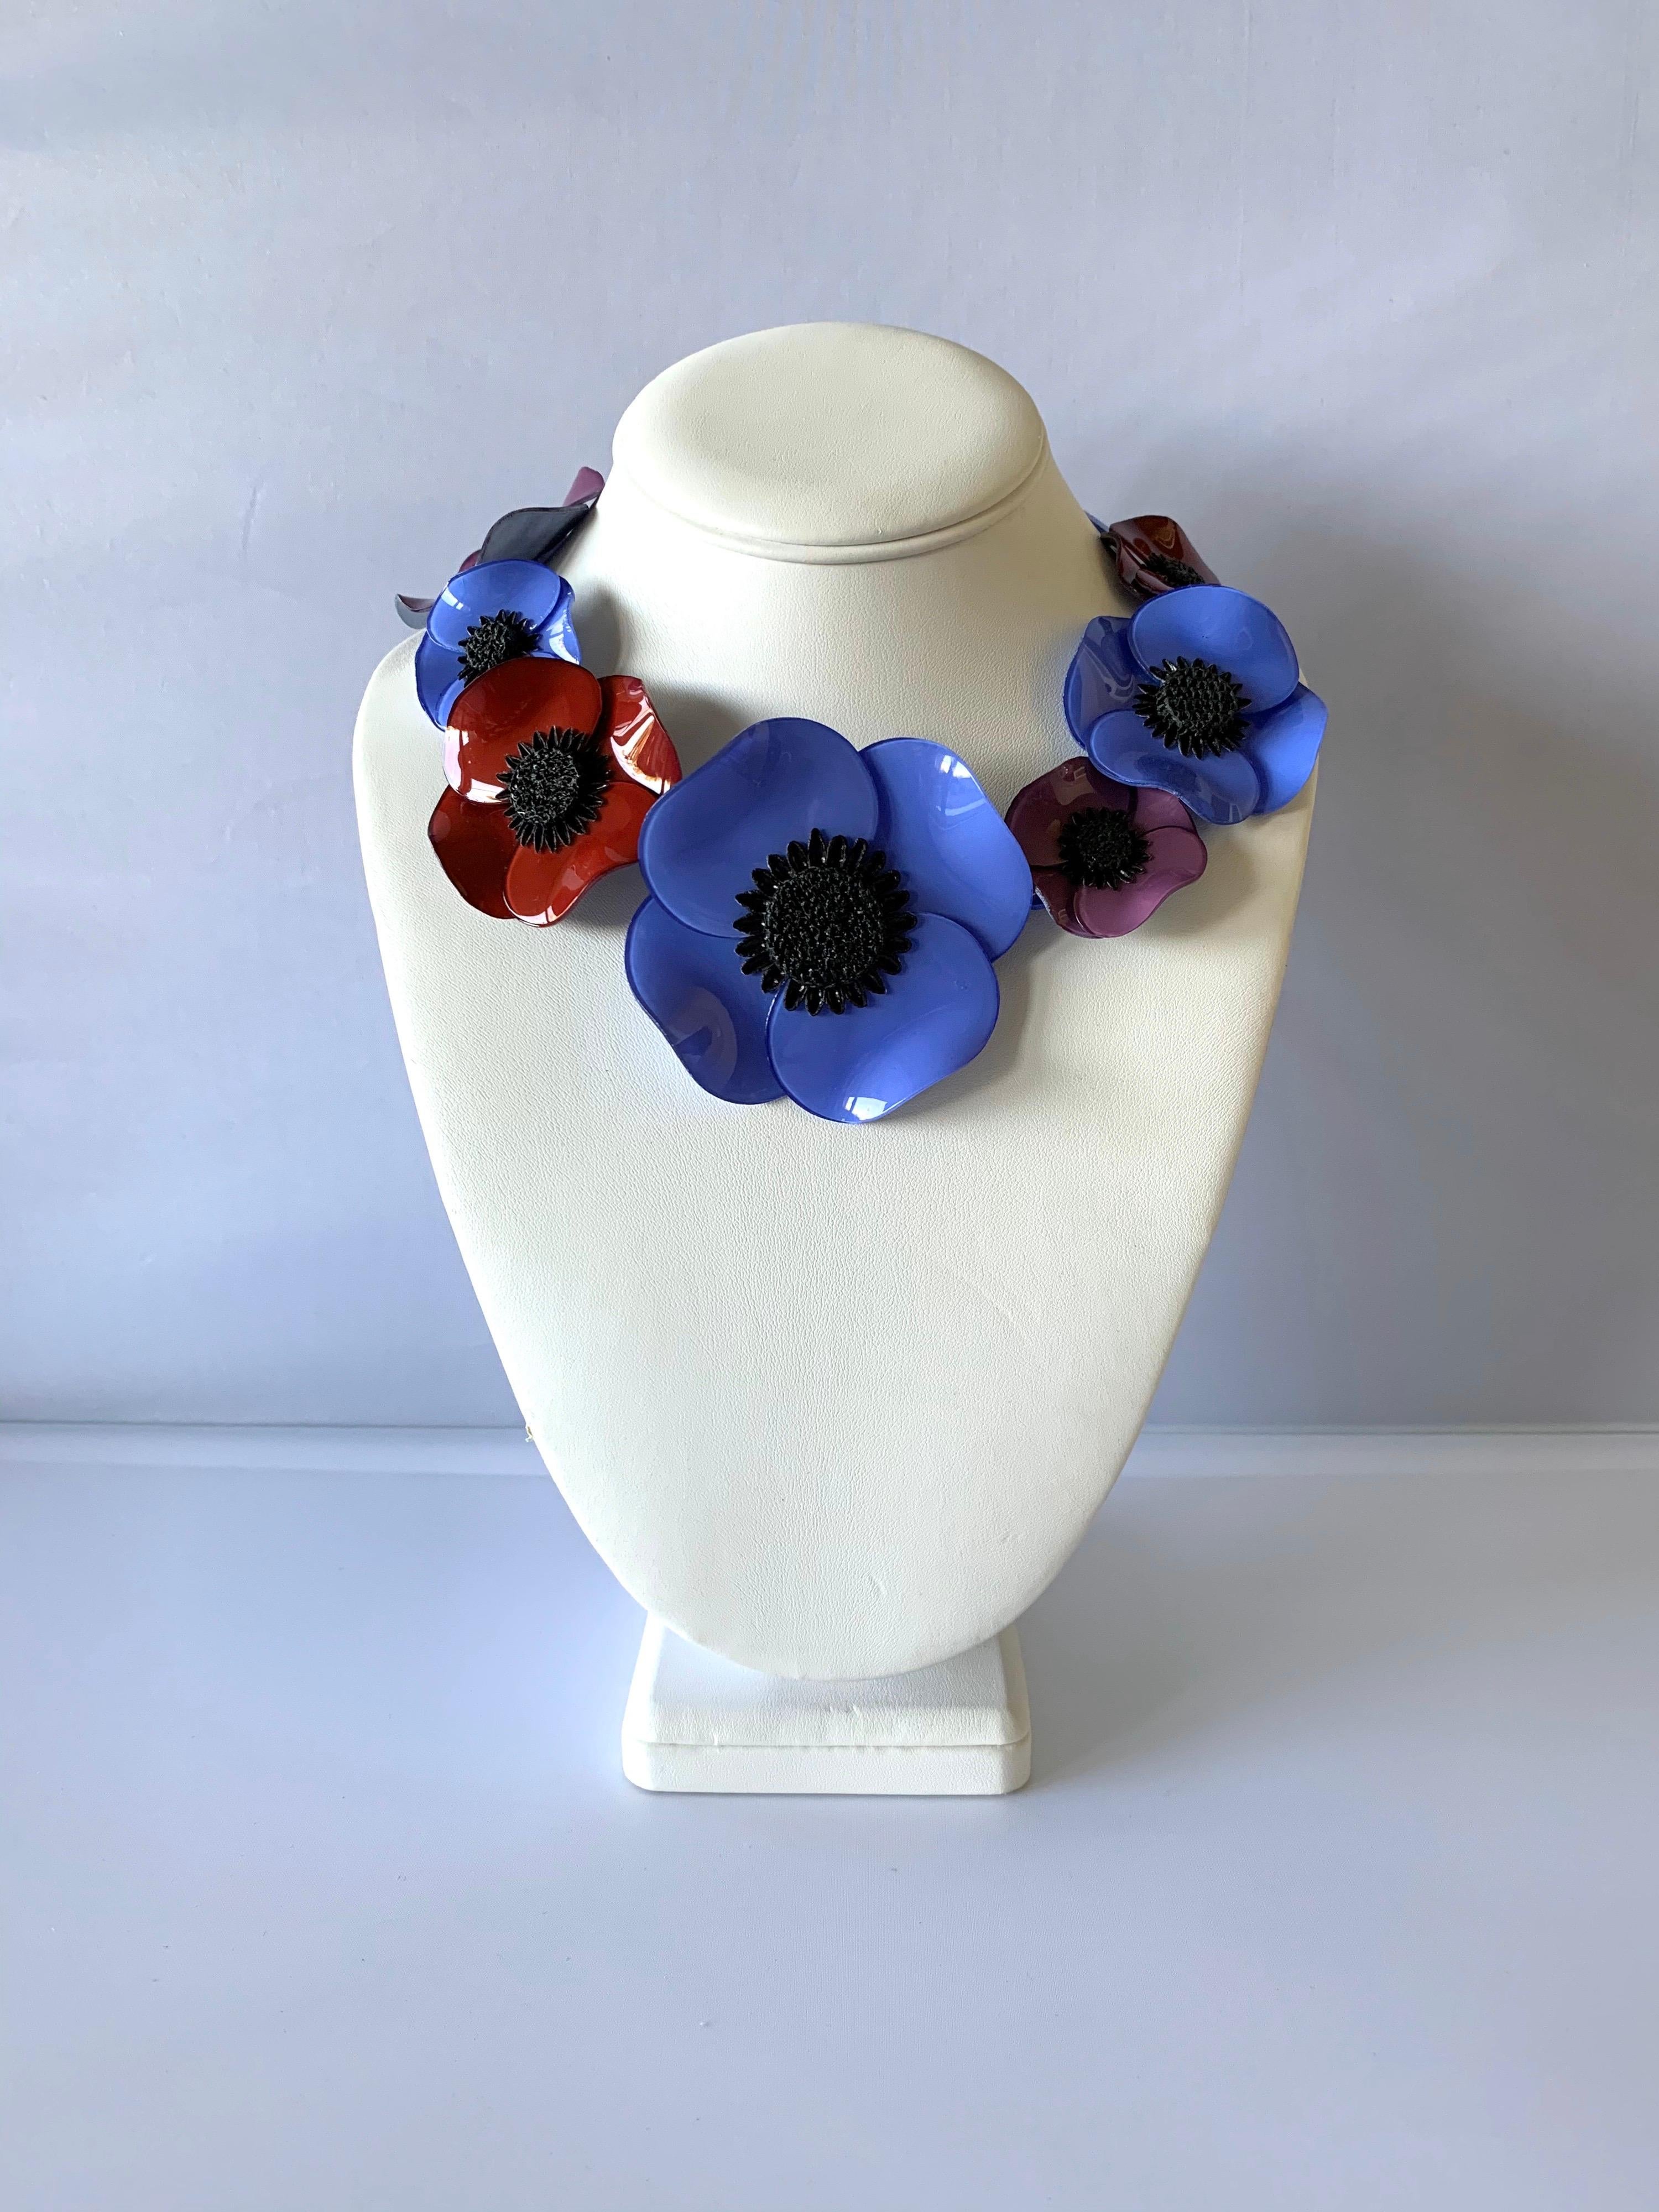 Contemporary handmade adjustable artisanal necklace was made in Paris by Cilea. The statement necklace features seven architectural enameline (enamel and resin composite) poppy flowers in blue, fuchsia, and purple. The poppies differ in size and